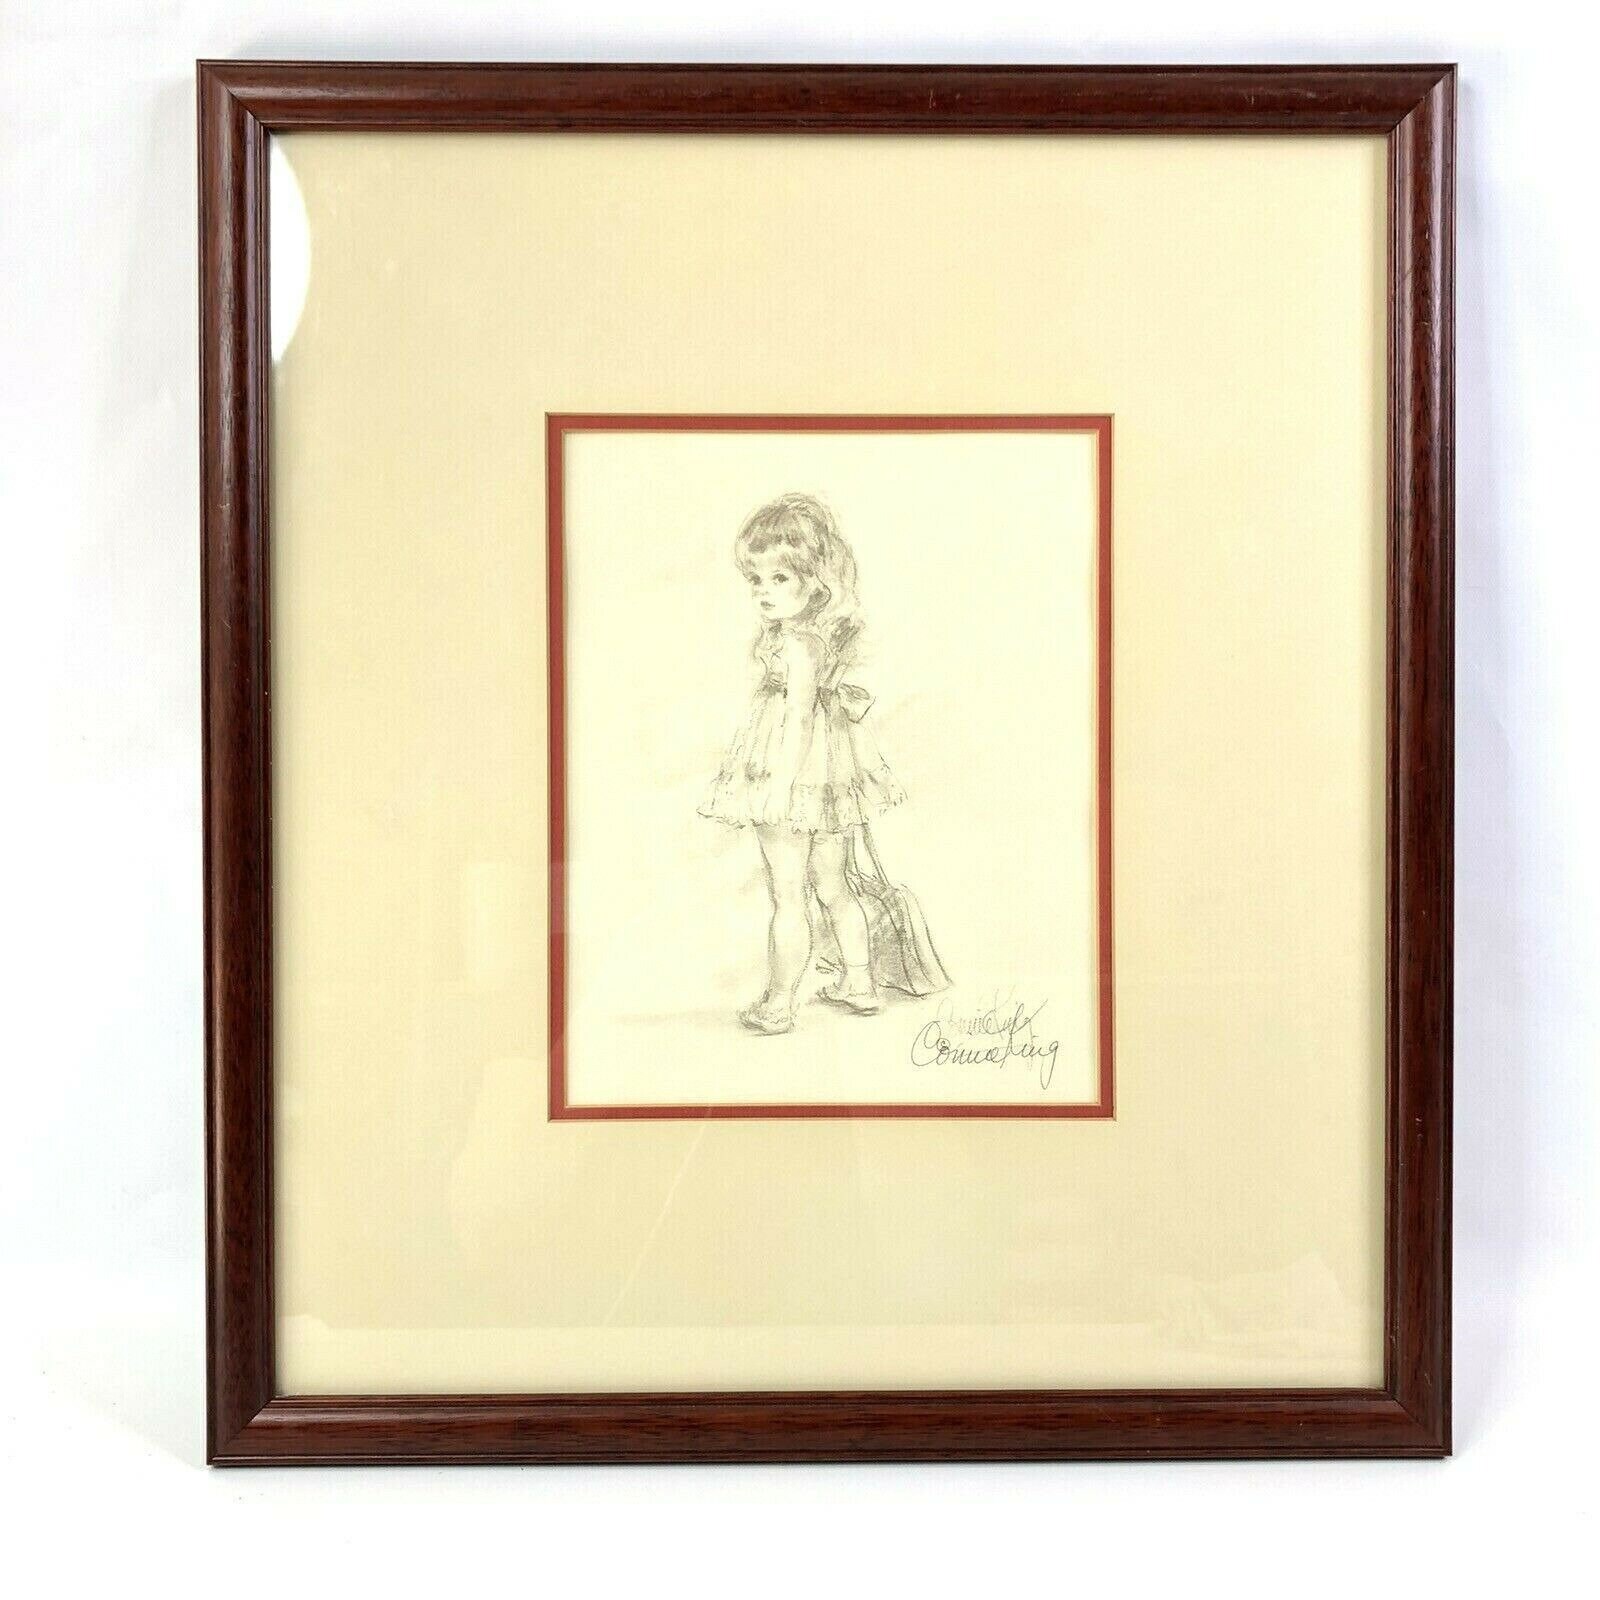 Buy Connie King Print Online In India - Etsy India